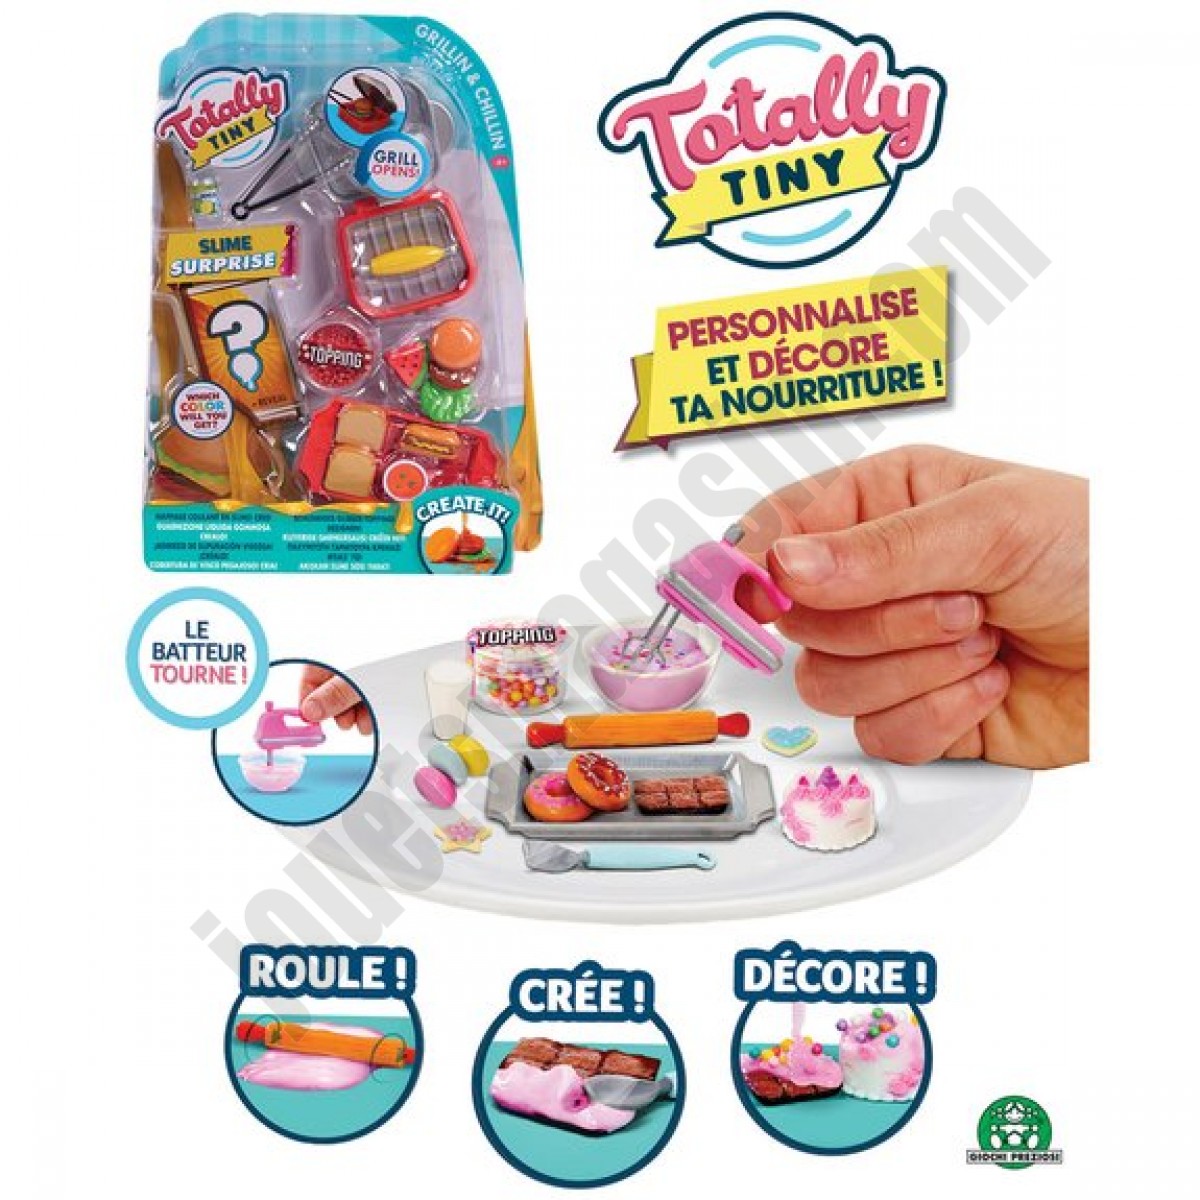 Totally Tiny - Set Cook N’ Serve ◆◆◆ Nouveau - Totally Tiny - Set Cook N’ Serve ◆◆◆ Nouveau